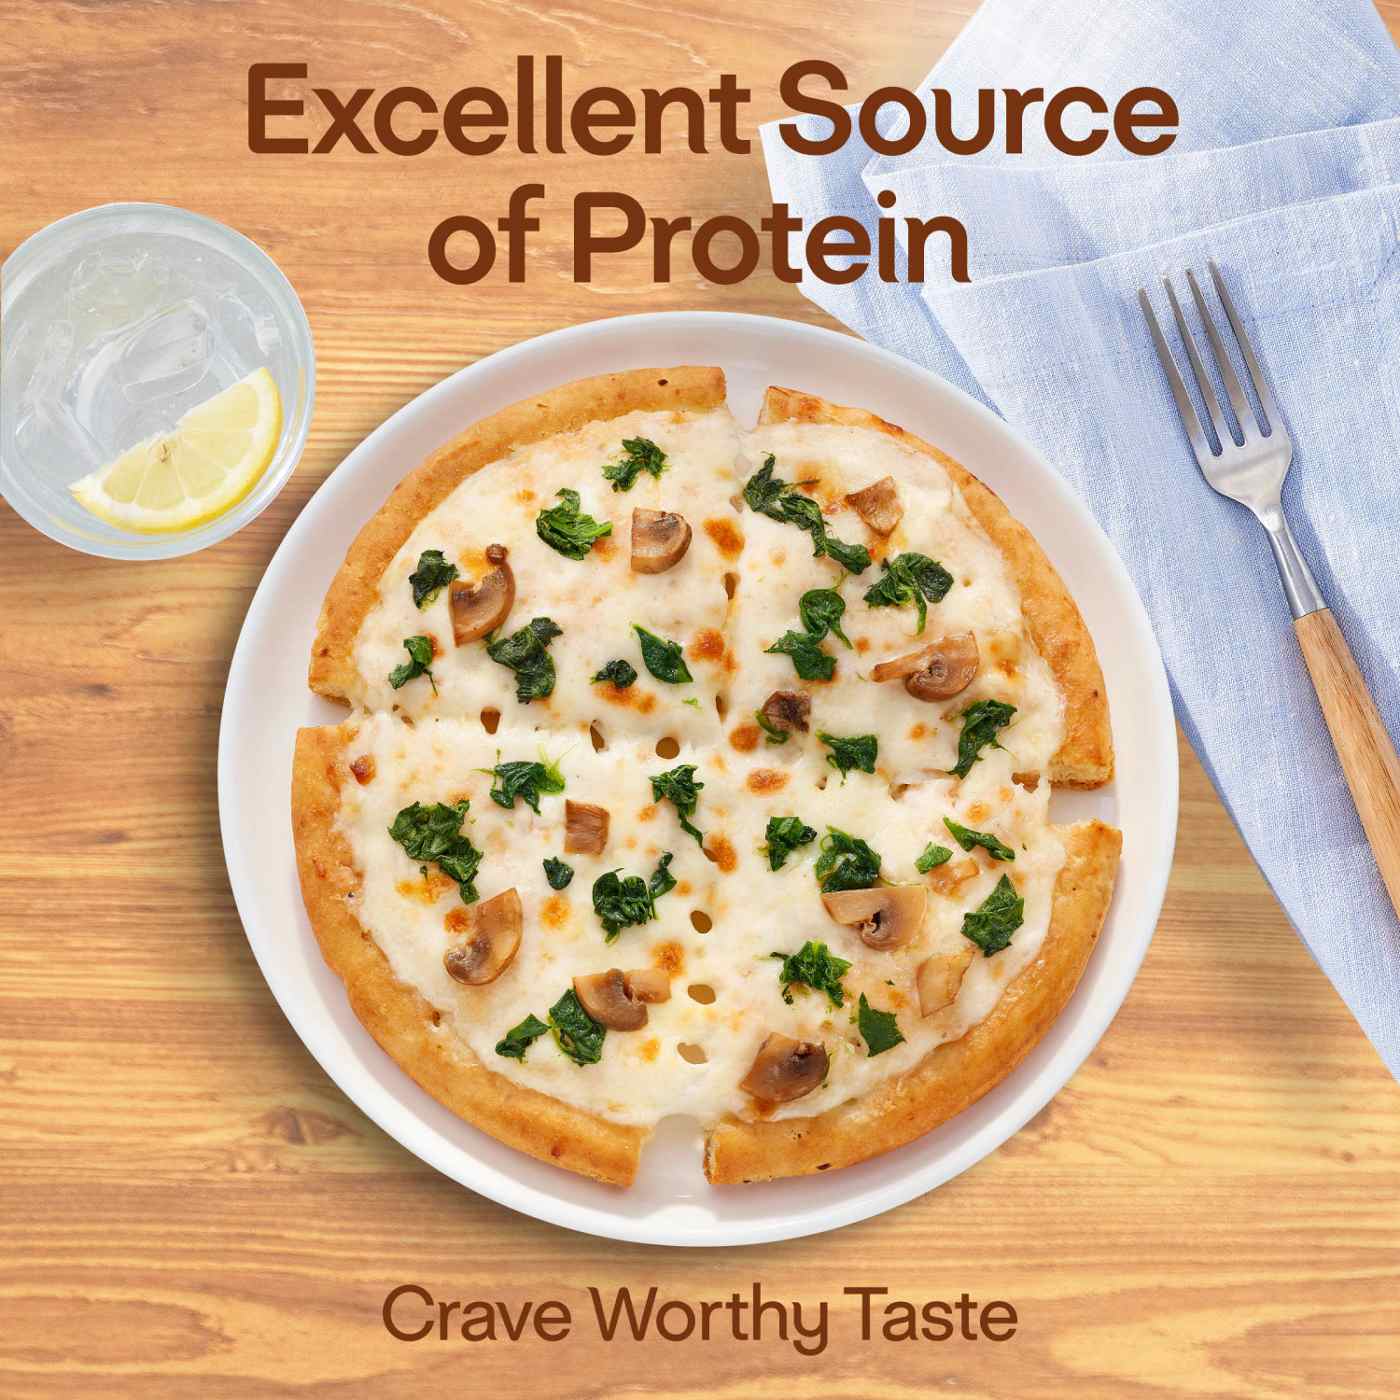 Lean Cuisine 18g Protein Frozen Pizza - Spinach & Mushroom; image 3 of 7